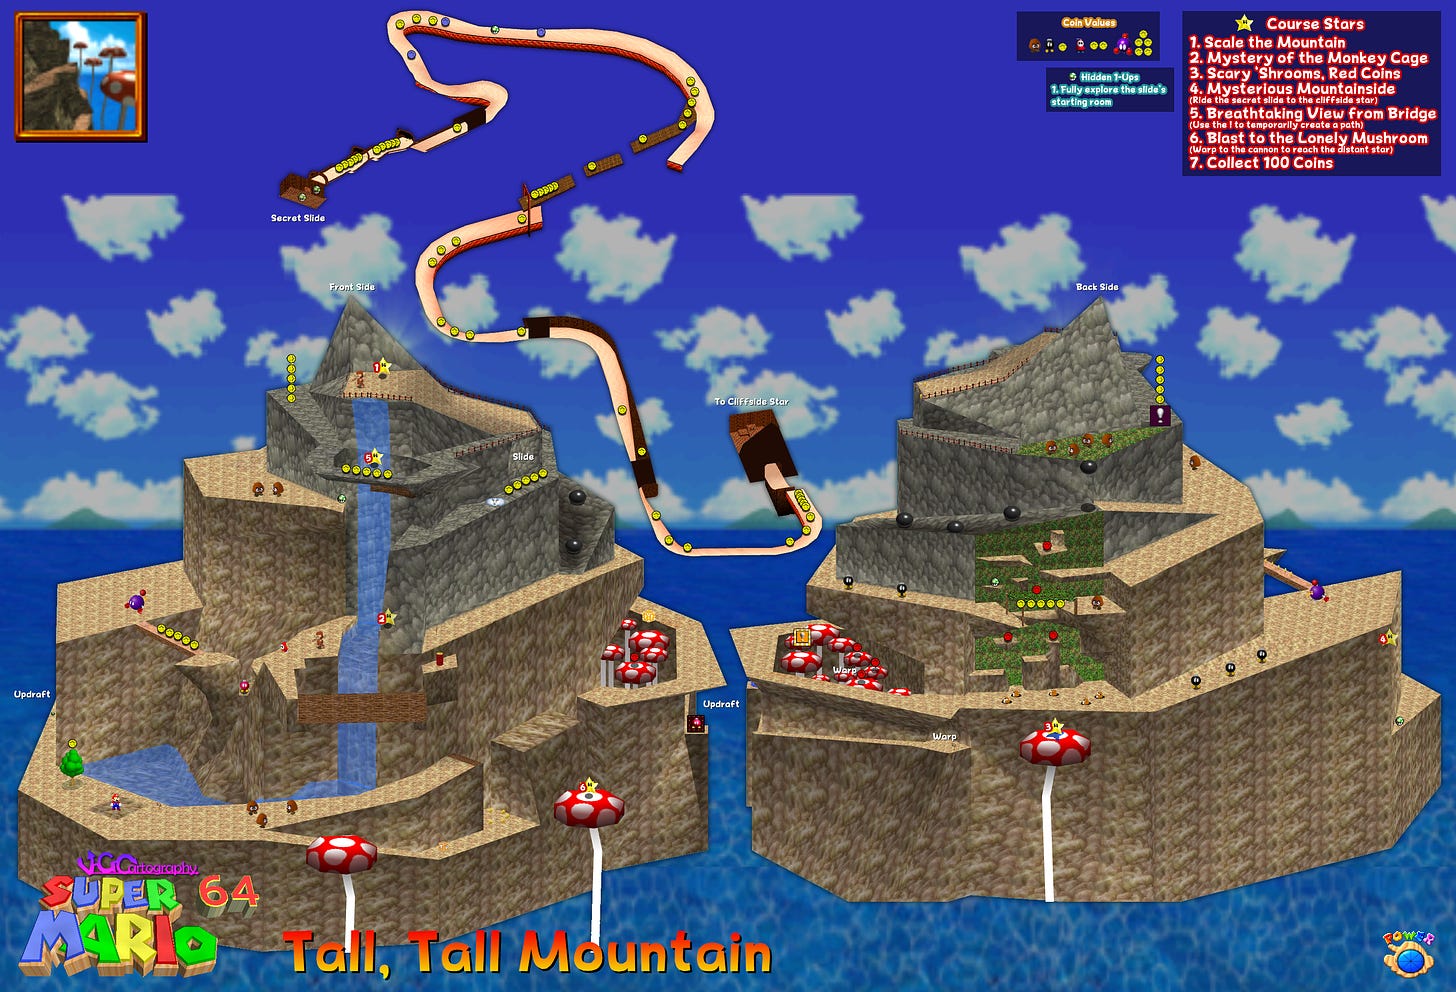 Super Mario 64 | Tall, Tall Mountain Map by VGCartography on DeviantArt